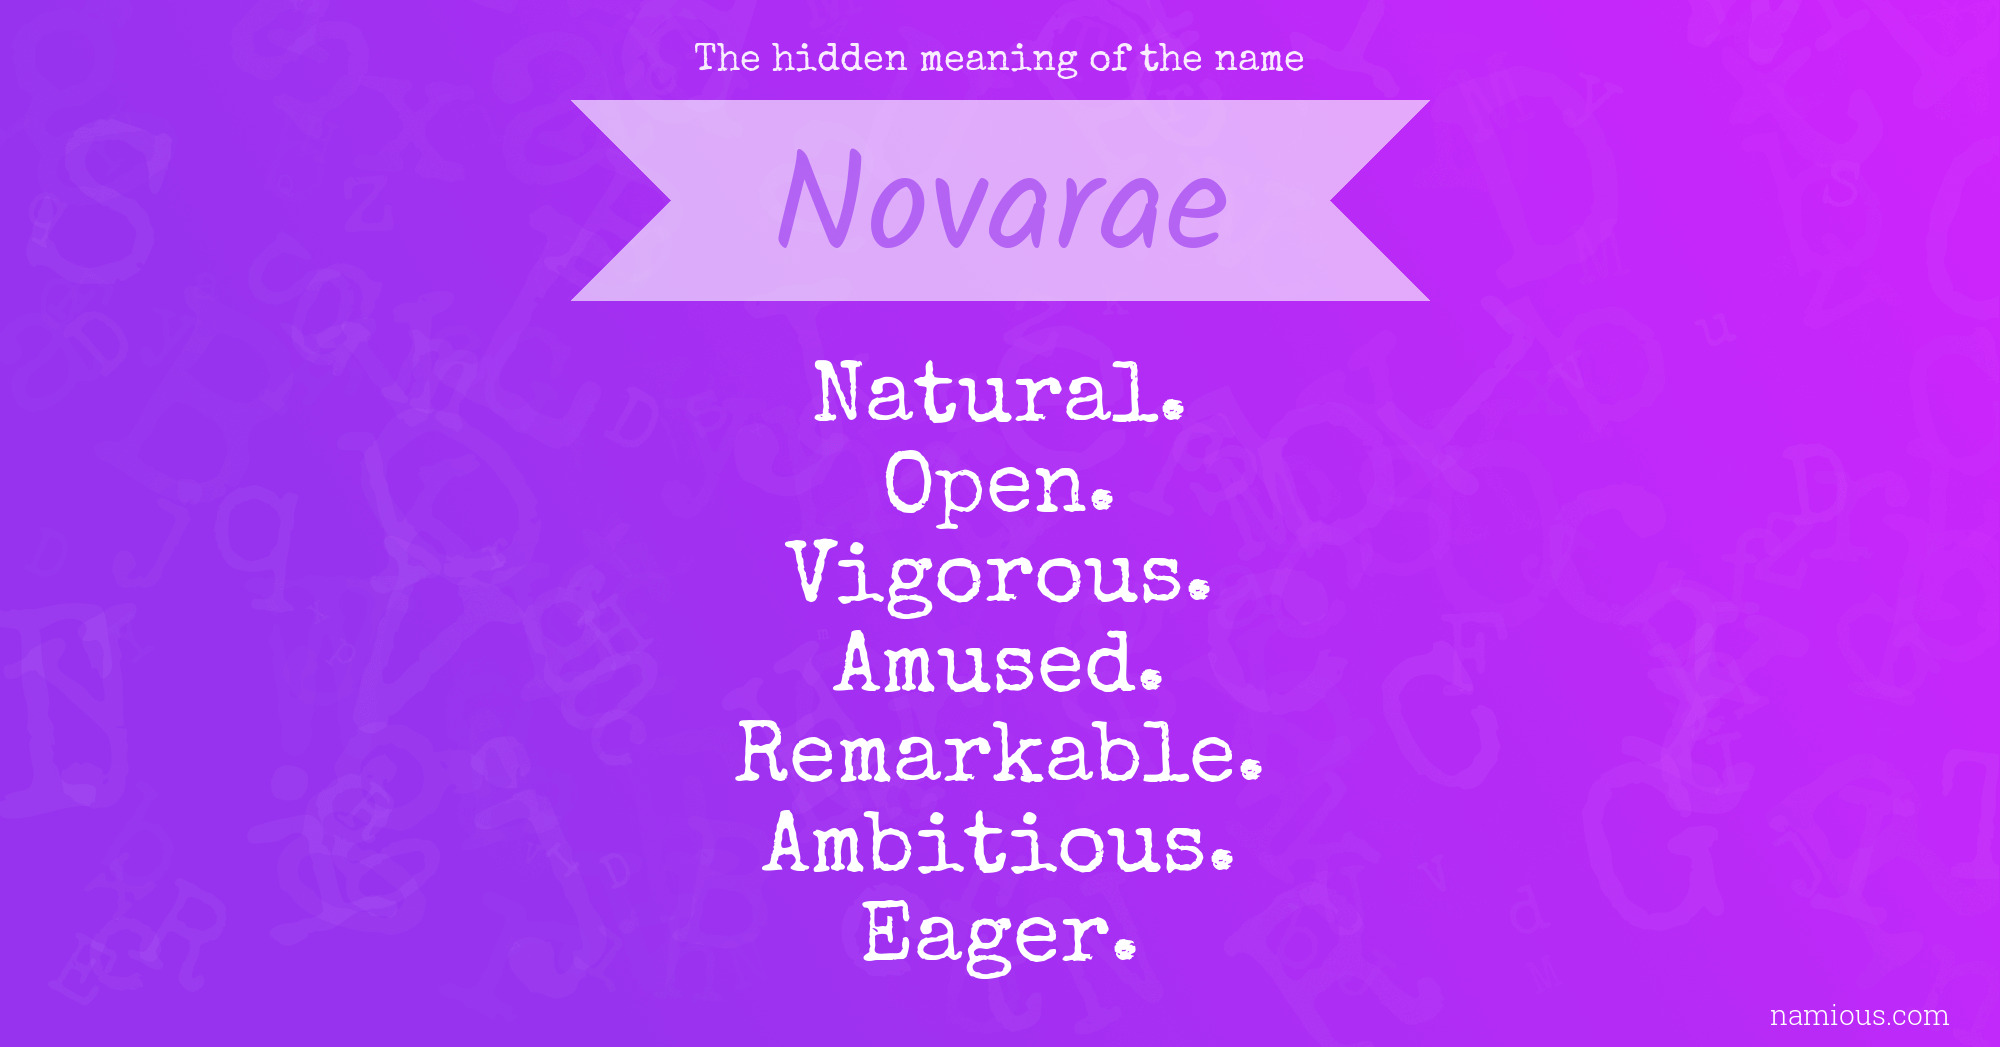 The hidden meaning of the name Novarae